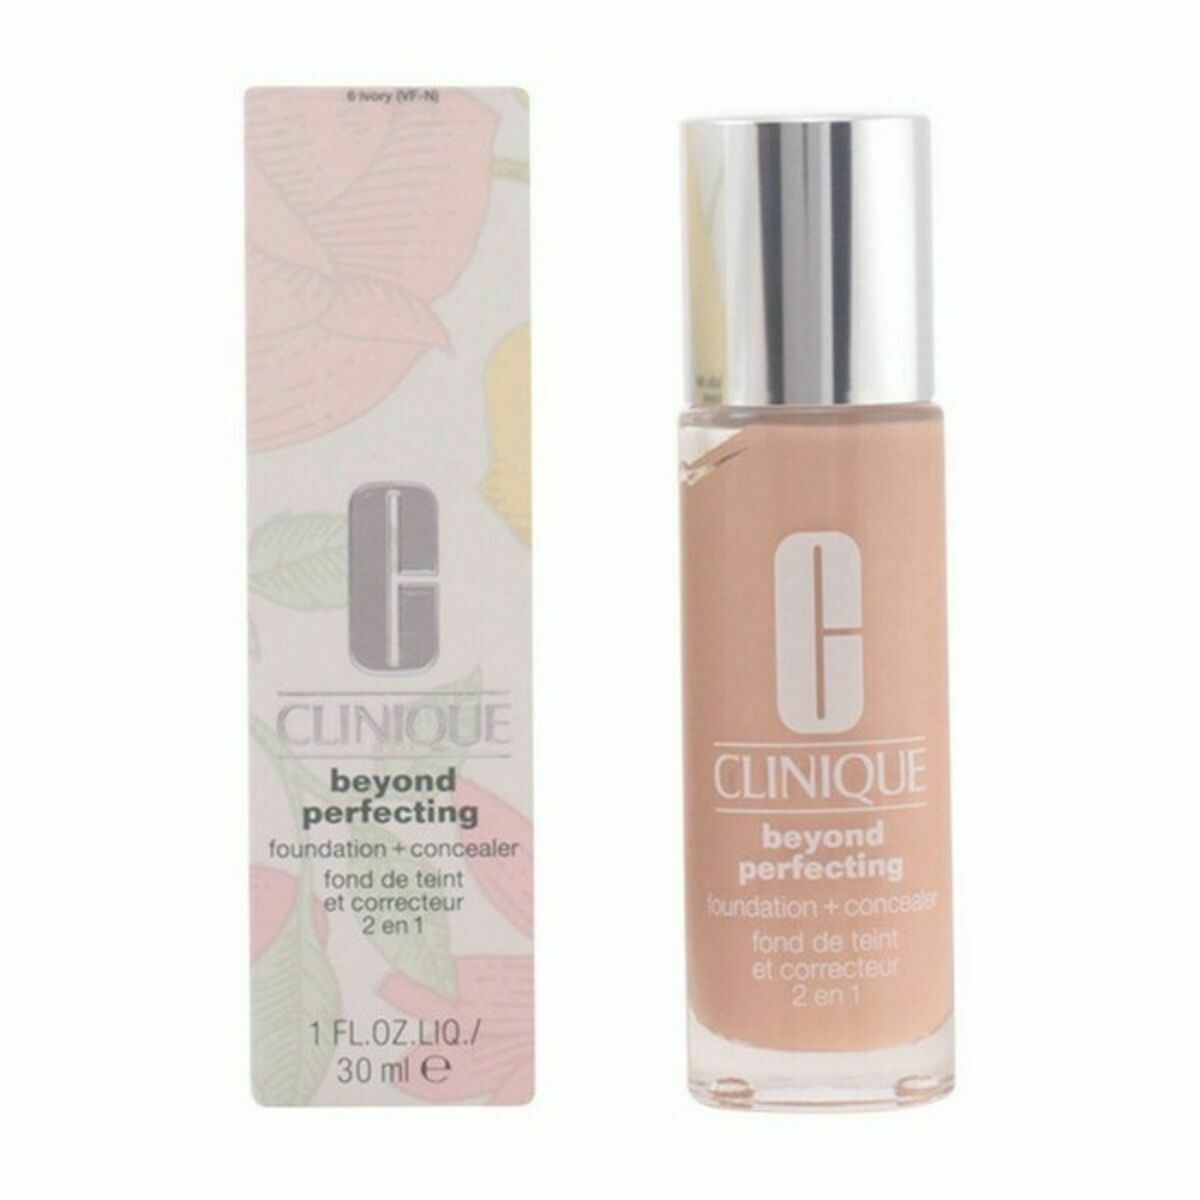 Kaufe Fluid Makeup Basis Clinique Beyond Perfecting 02-alabaster 2-in-1 30 ml bei AWK Flagship um € 50.00